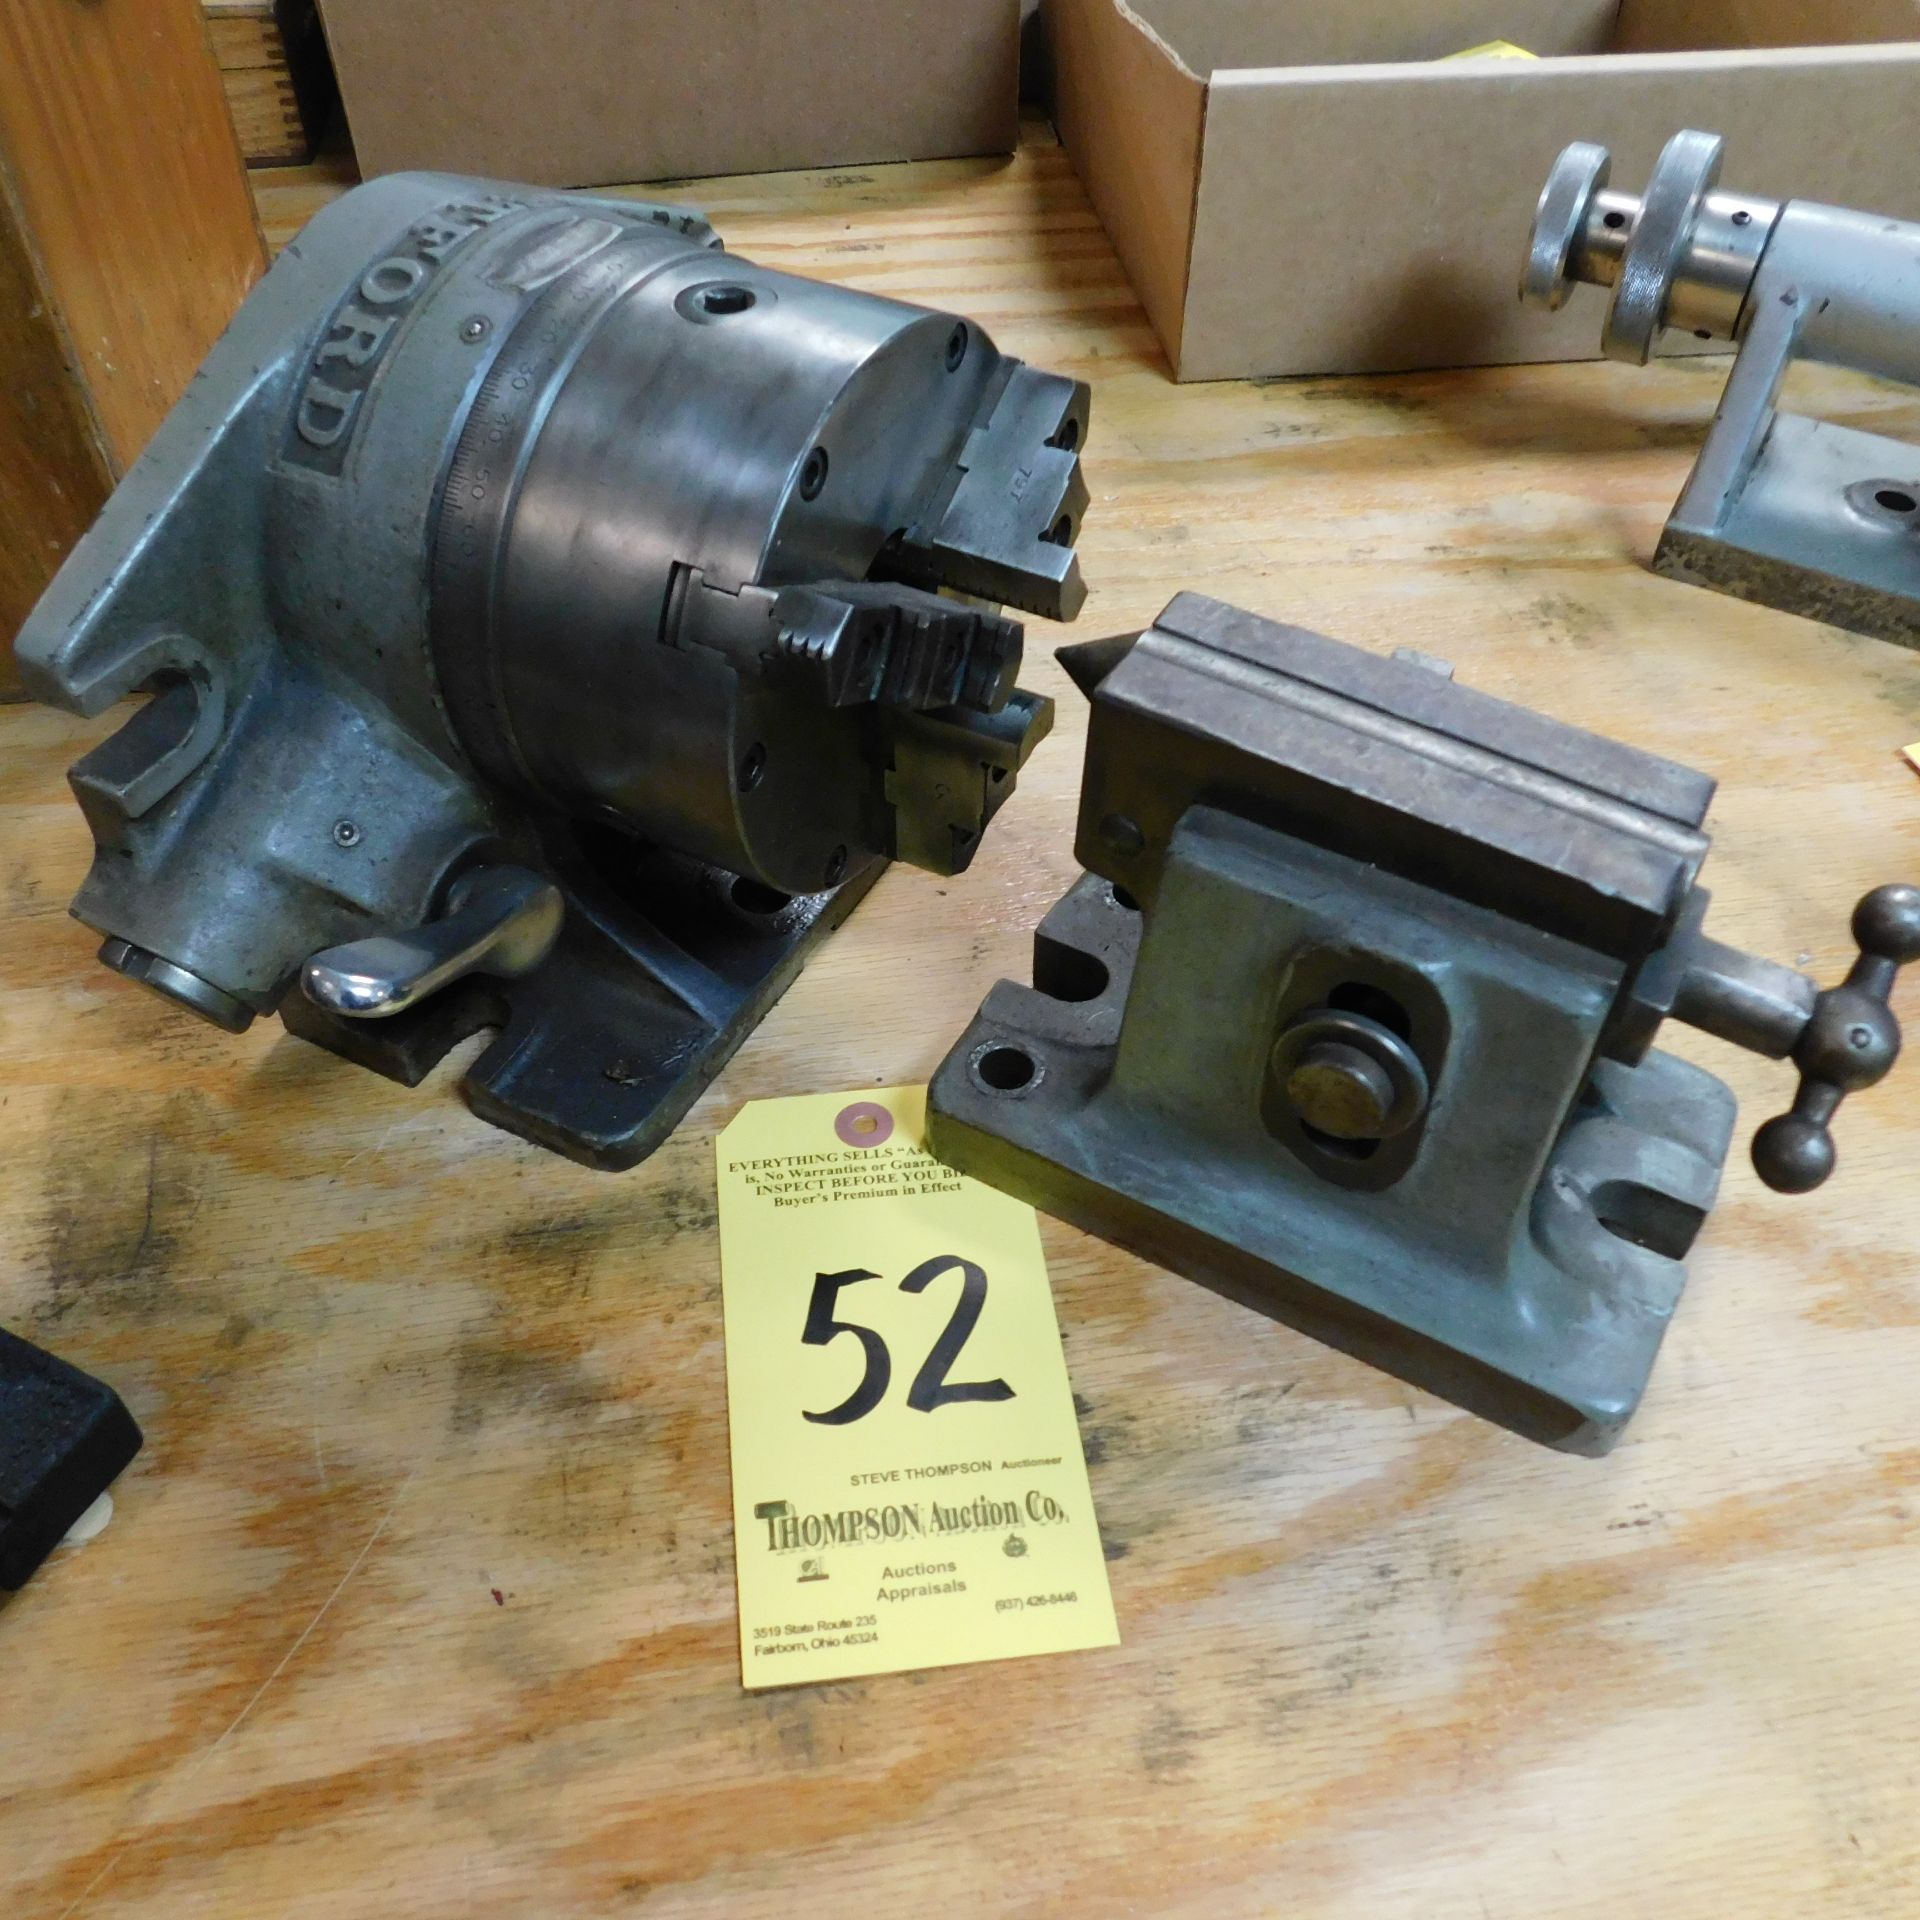 Hartford Indexer with 5" 3-Jaw Chuck and Tailstock